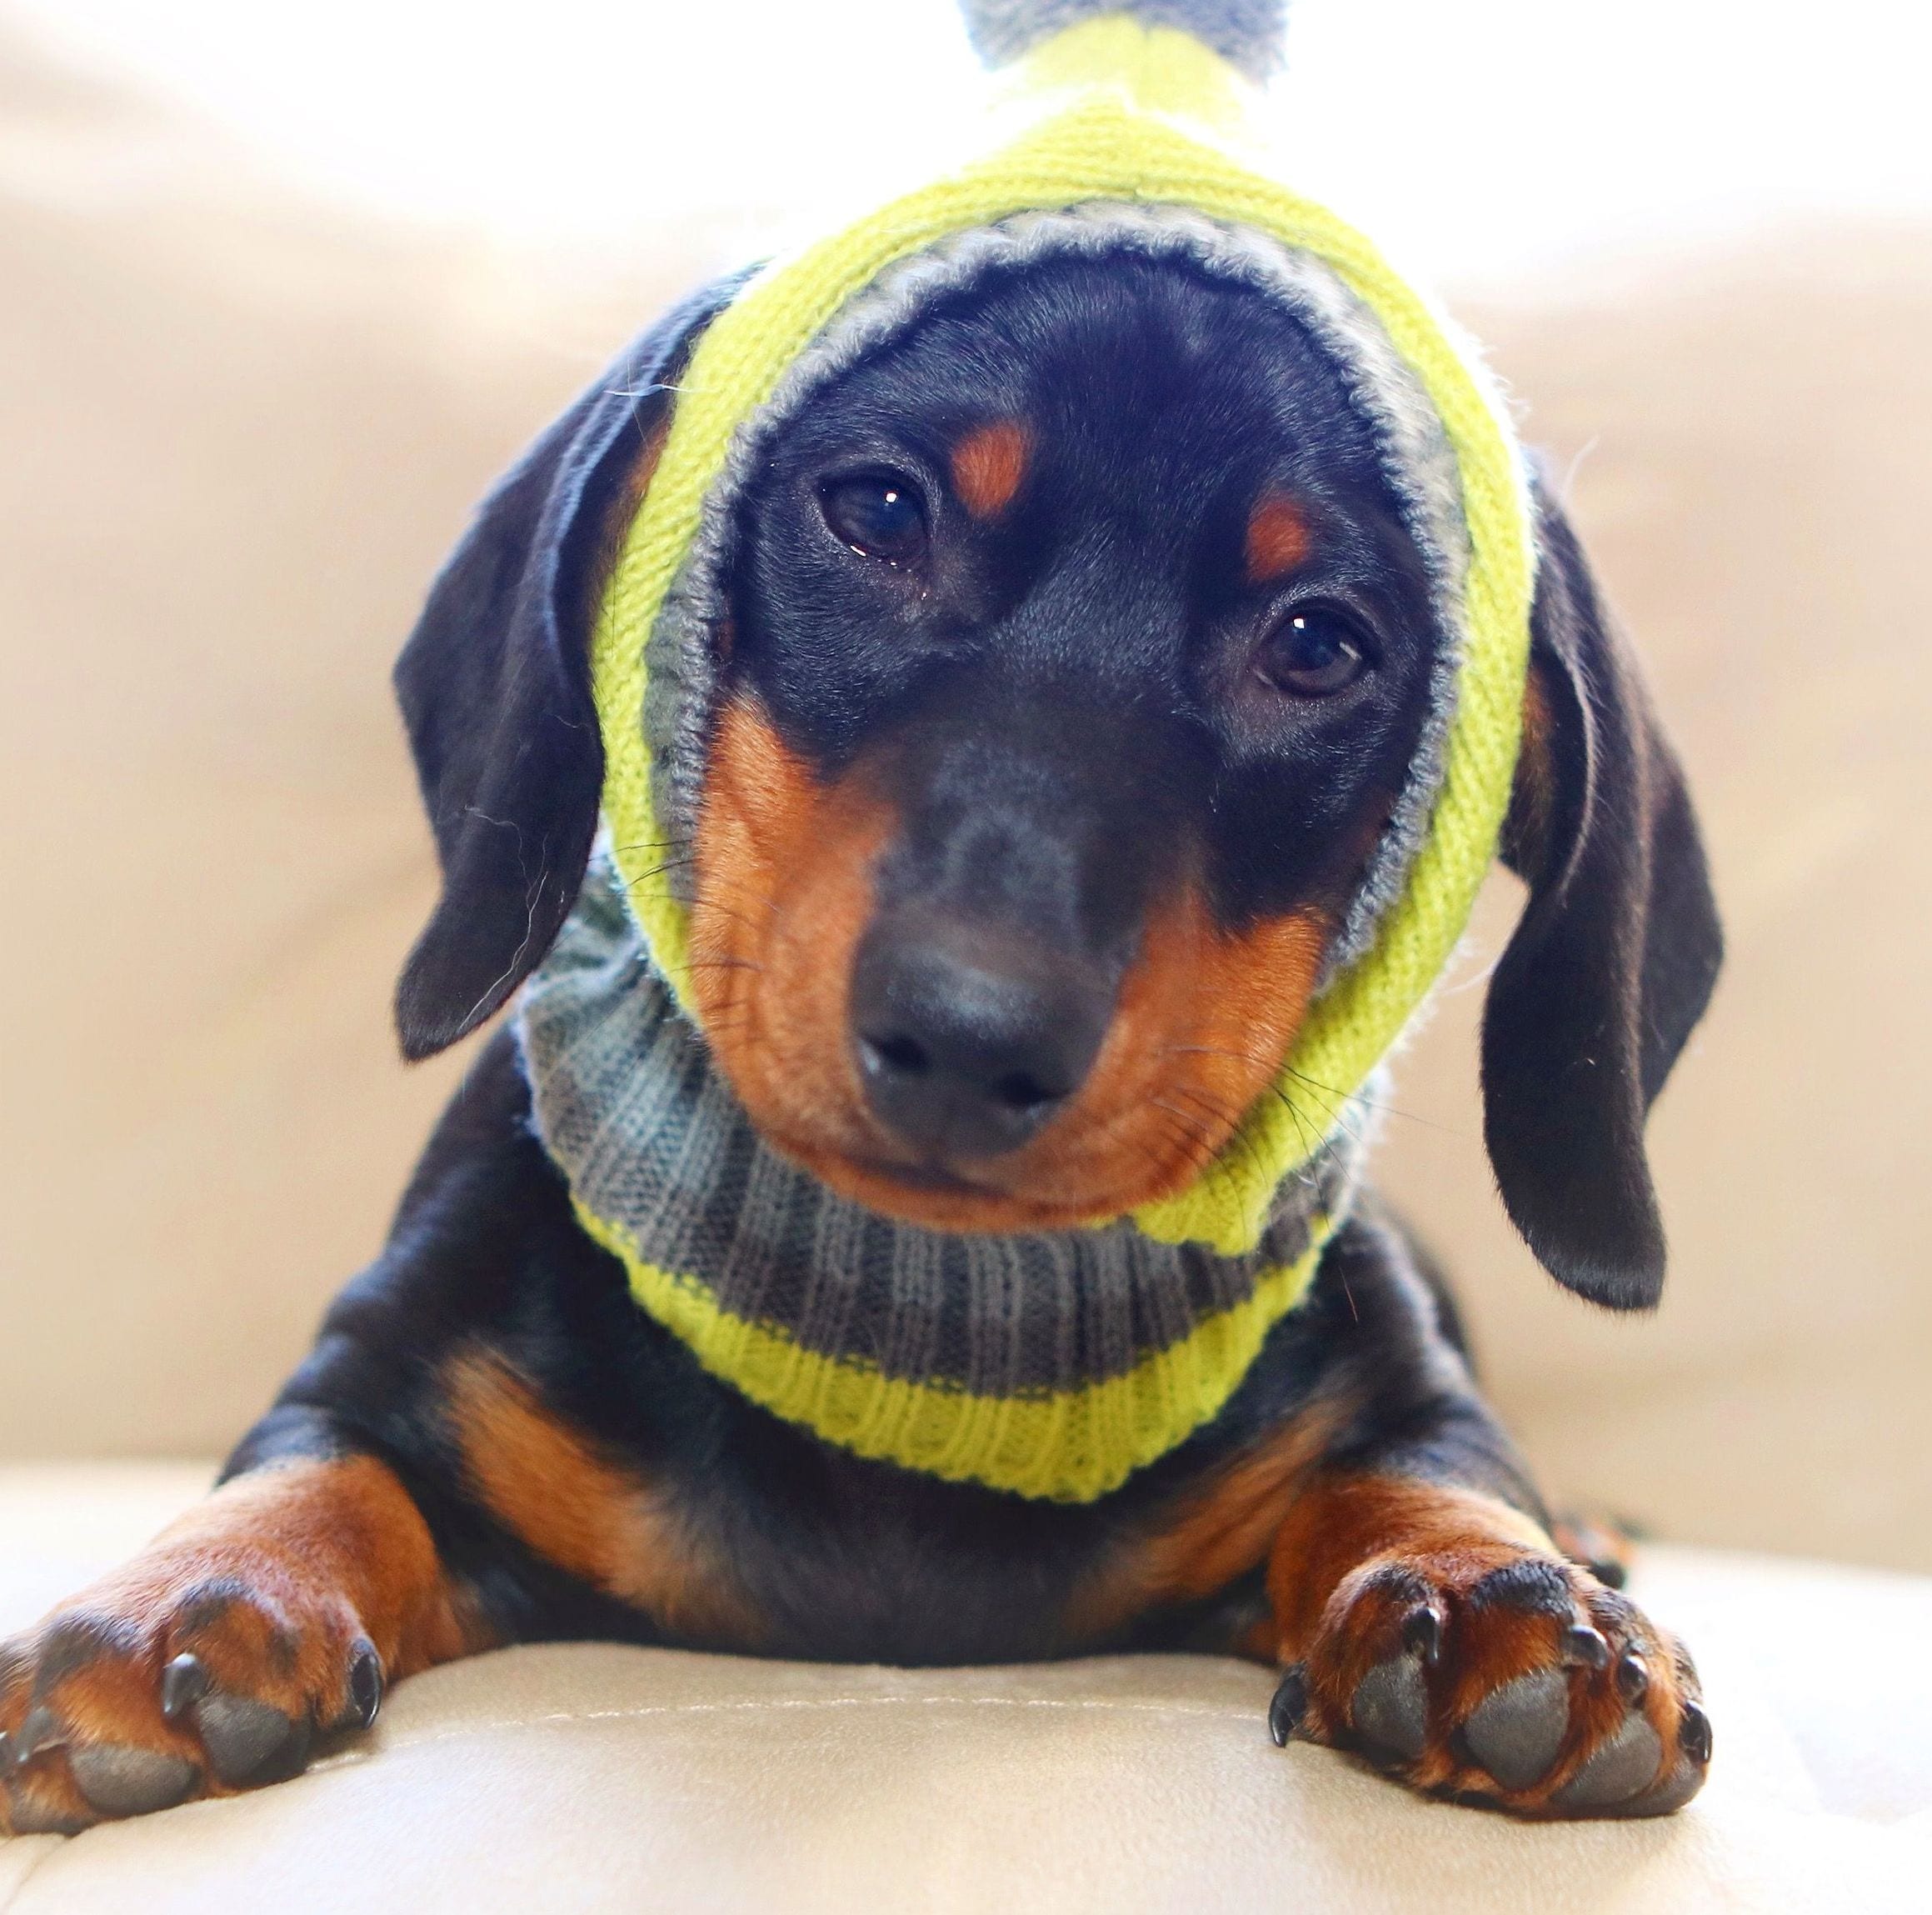 A Dachshund wearing a striped yellow and gray headpiece while lying on the couch